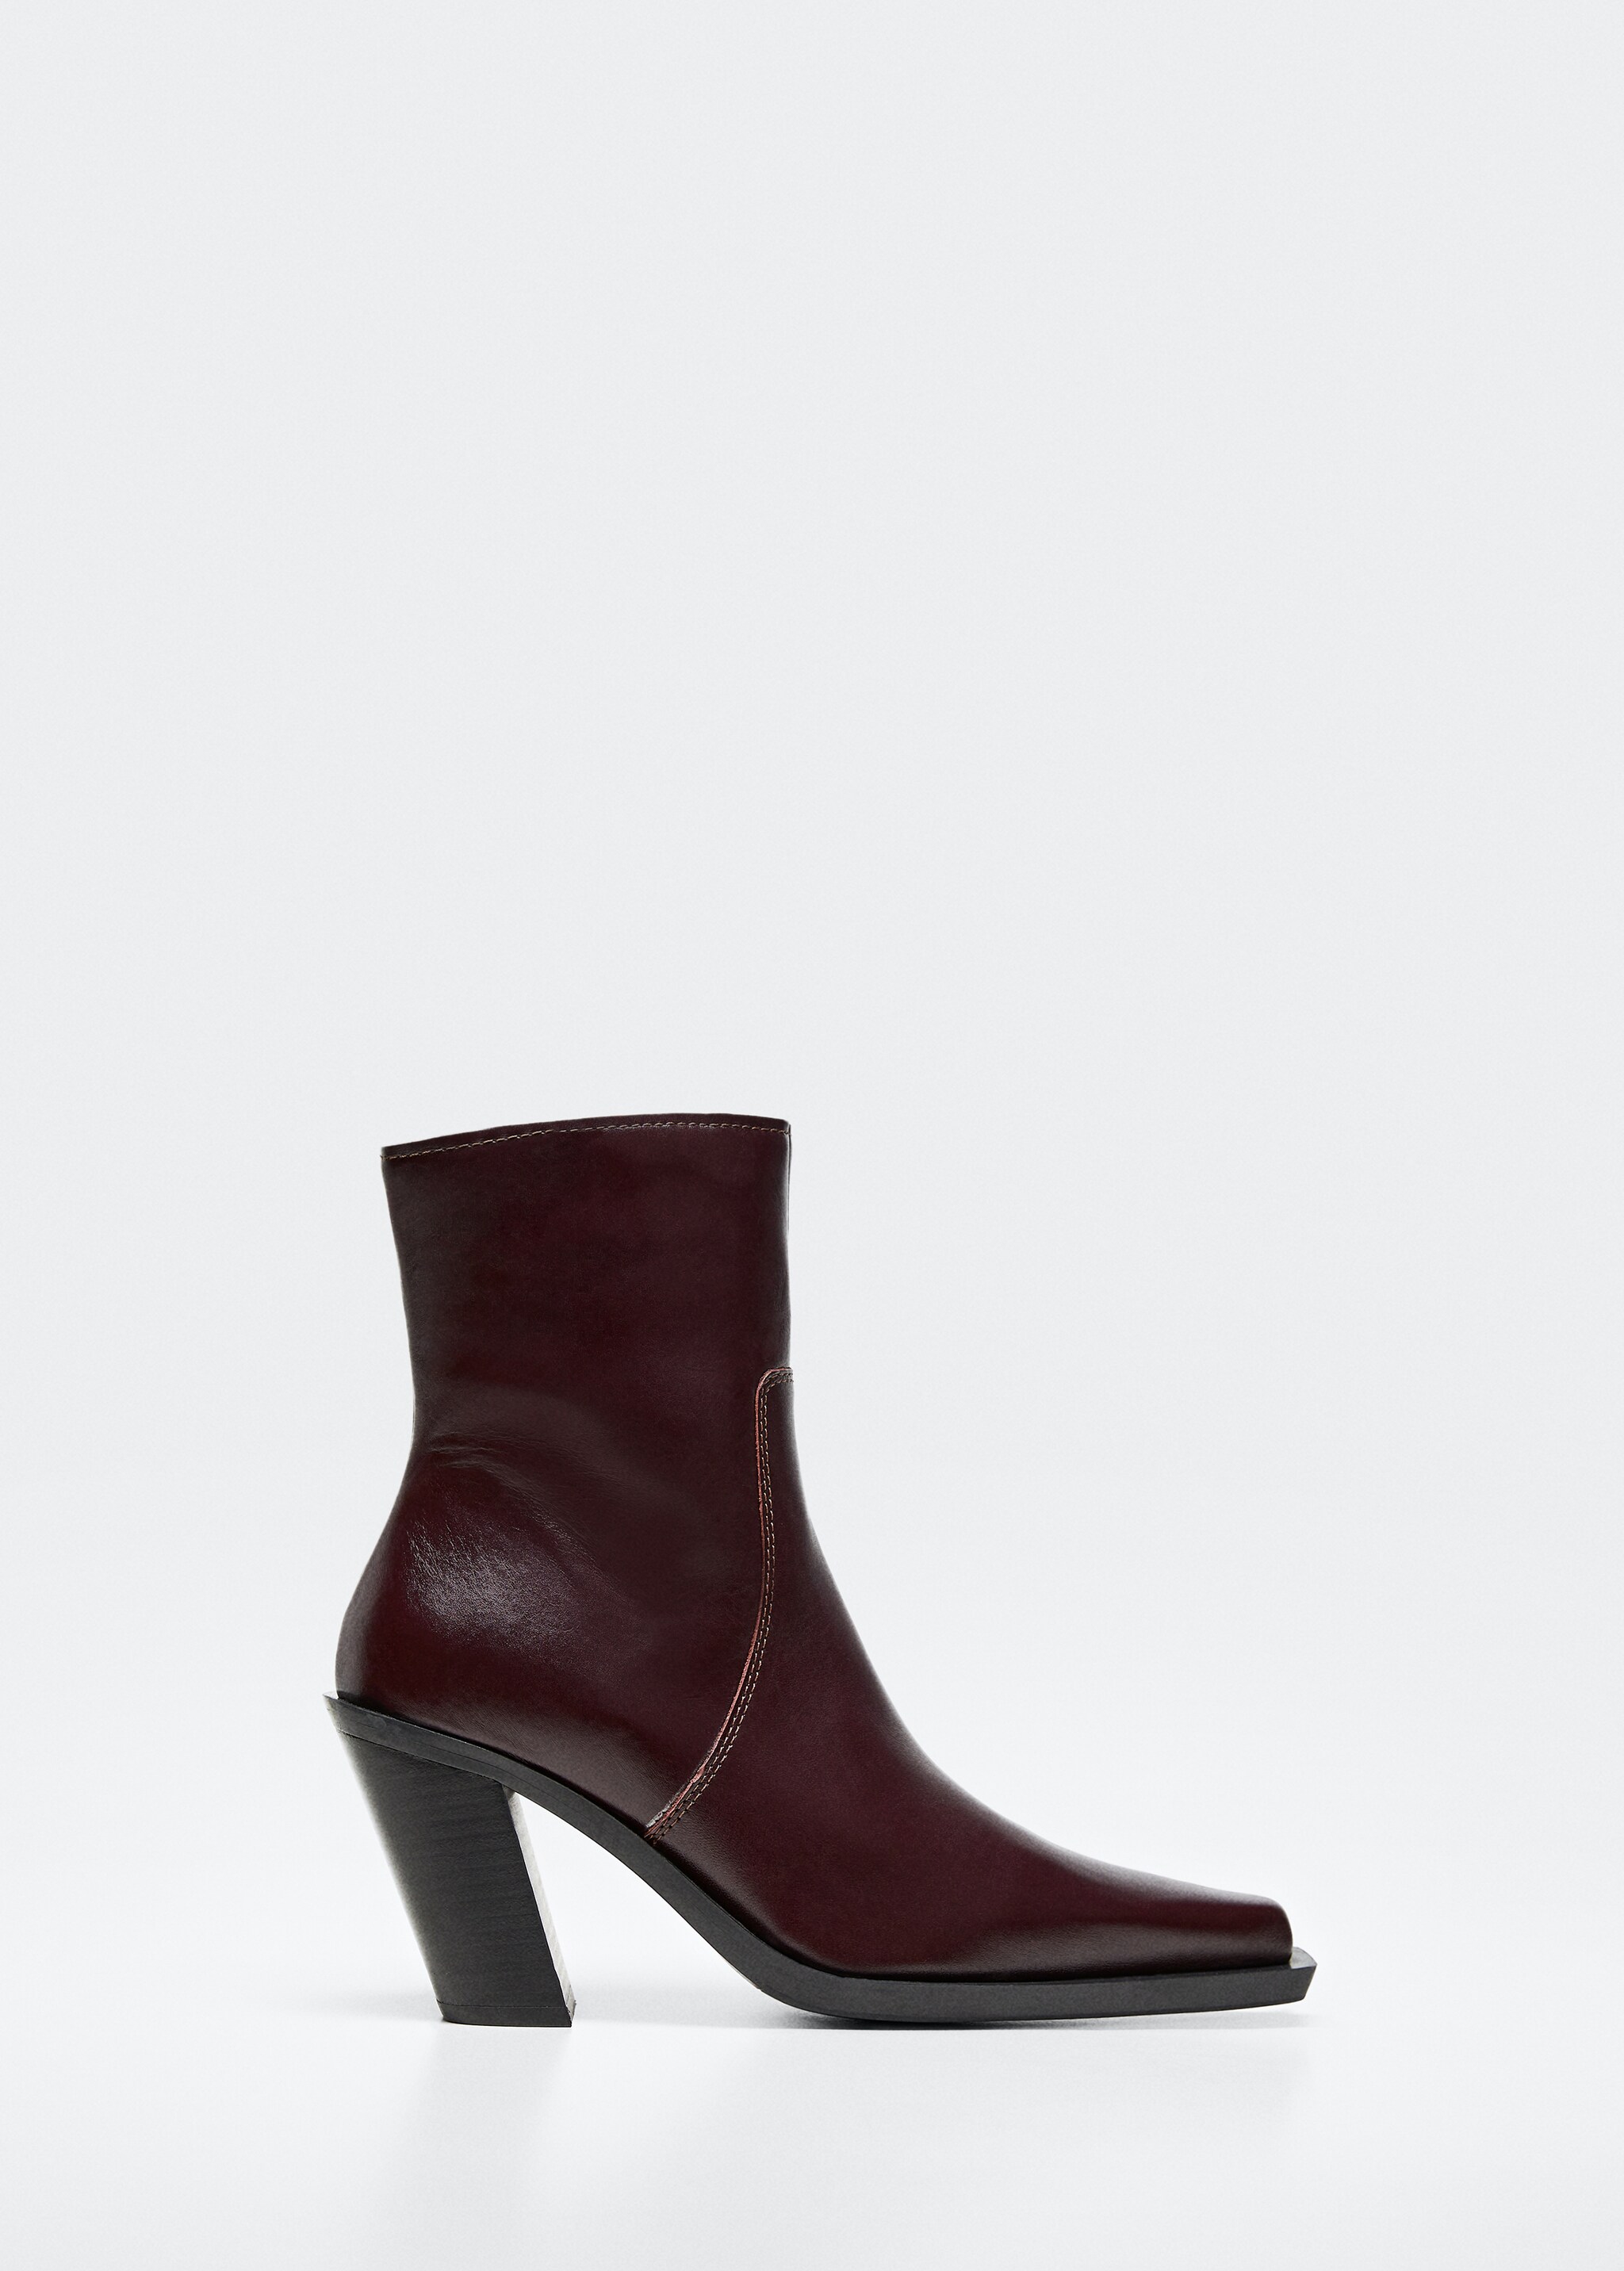 Leather pointed ankle boots - Article without model